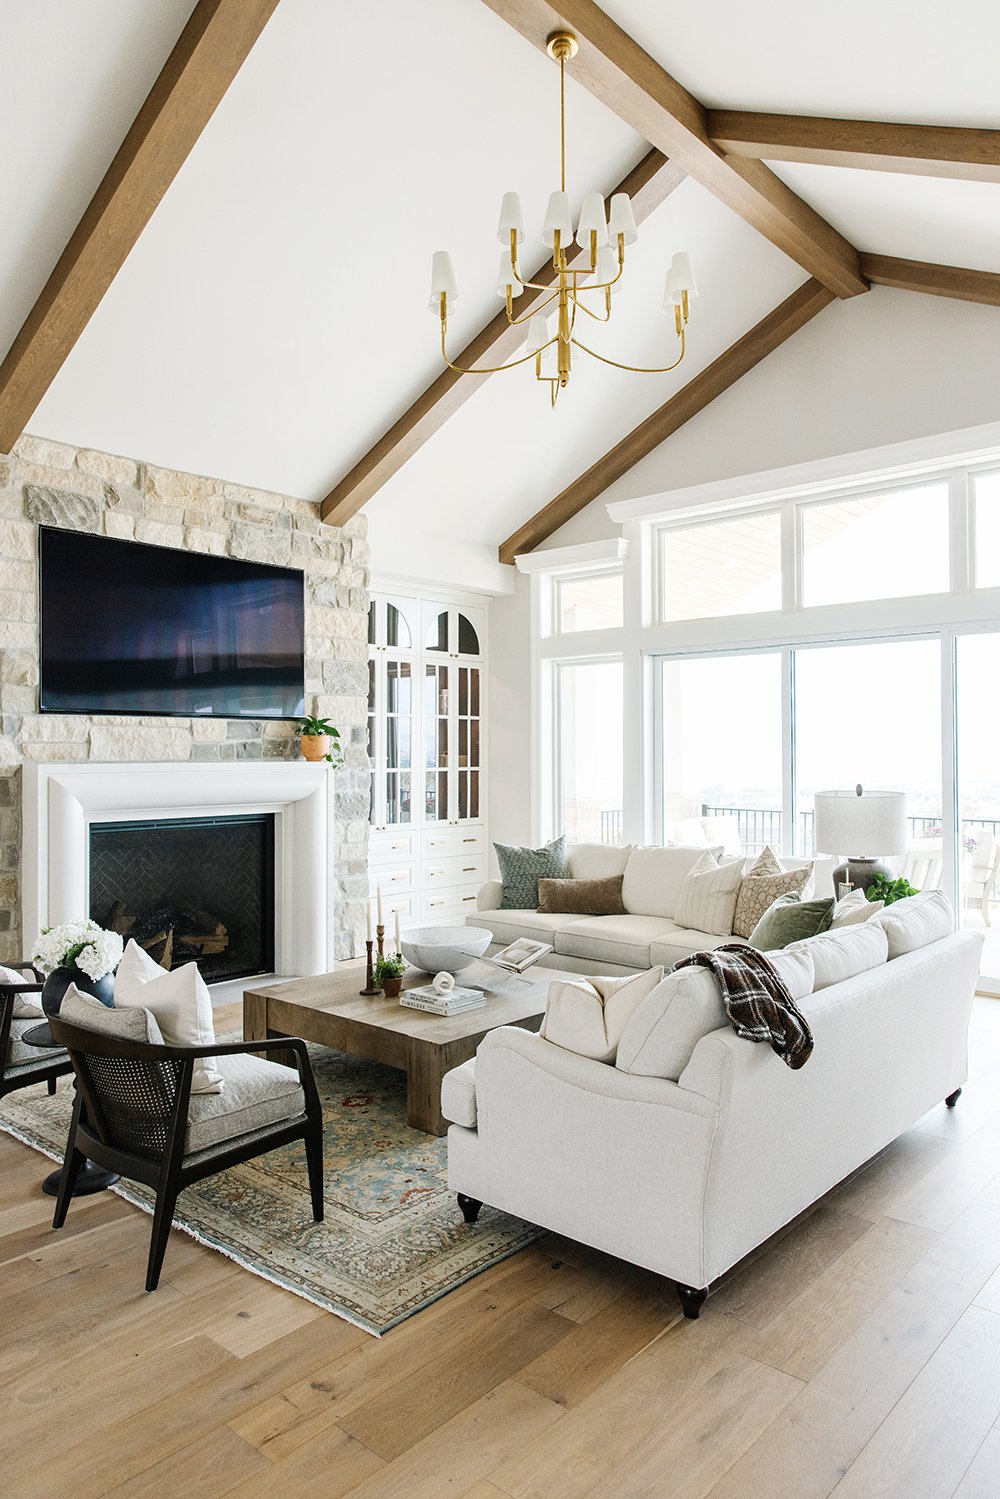  The exposed beams focus on the high ceilings and full windows. The light coloring of the rock on the fireplace flows with the neutral color palette. Exposed beams vaulted ceilings stone fireplace #lizpowell #exposedbeams #goldenchandelier 